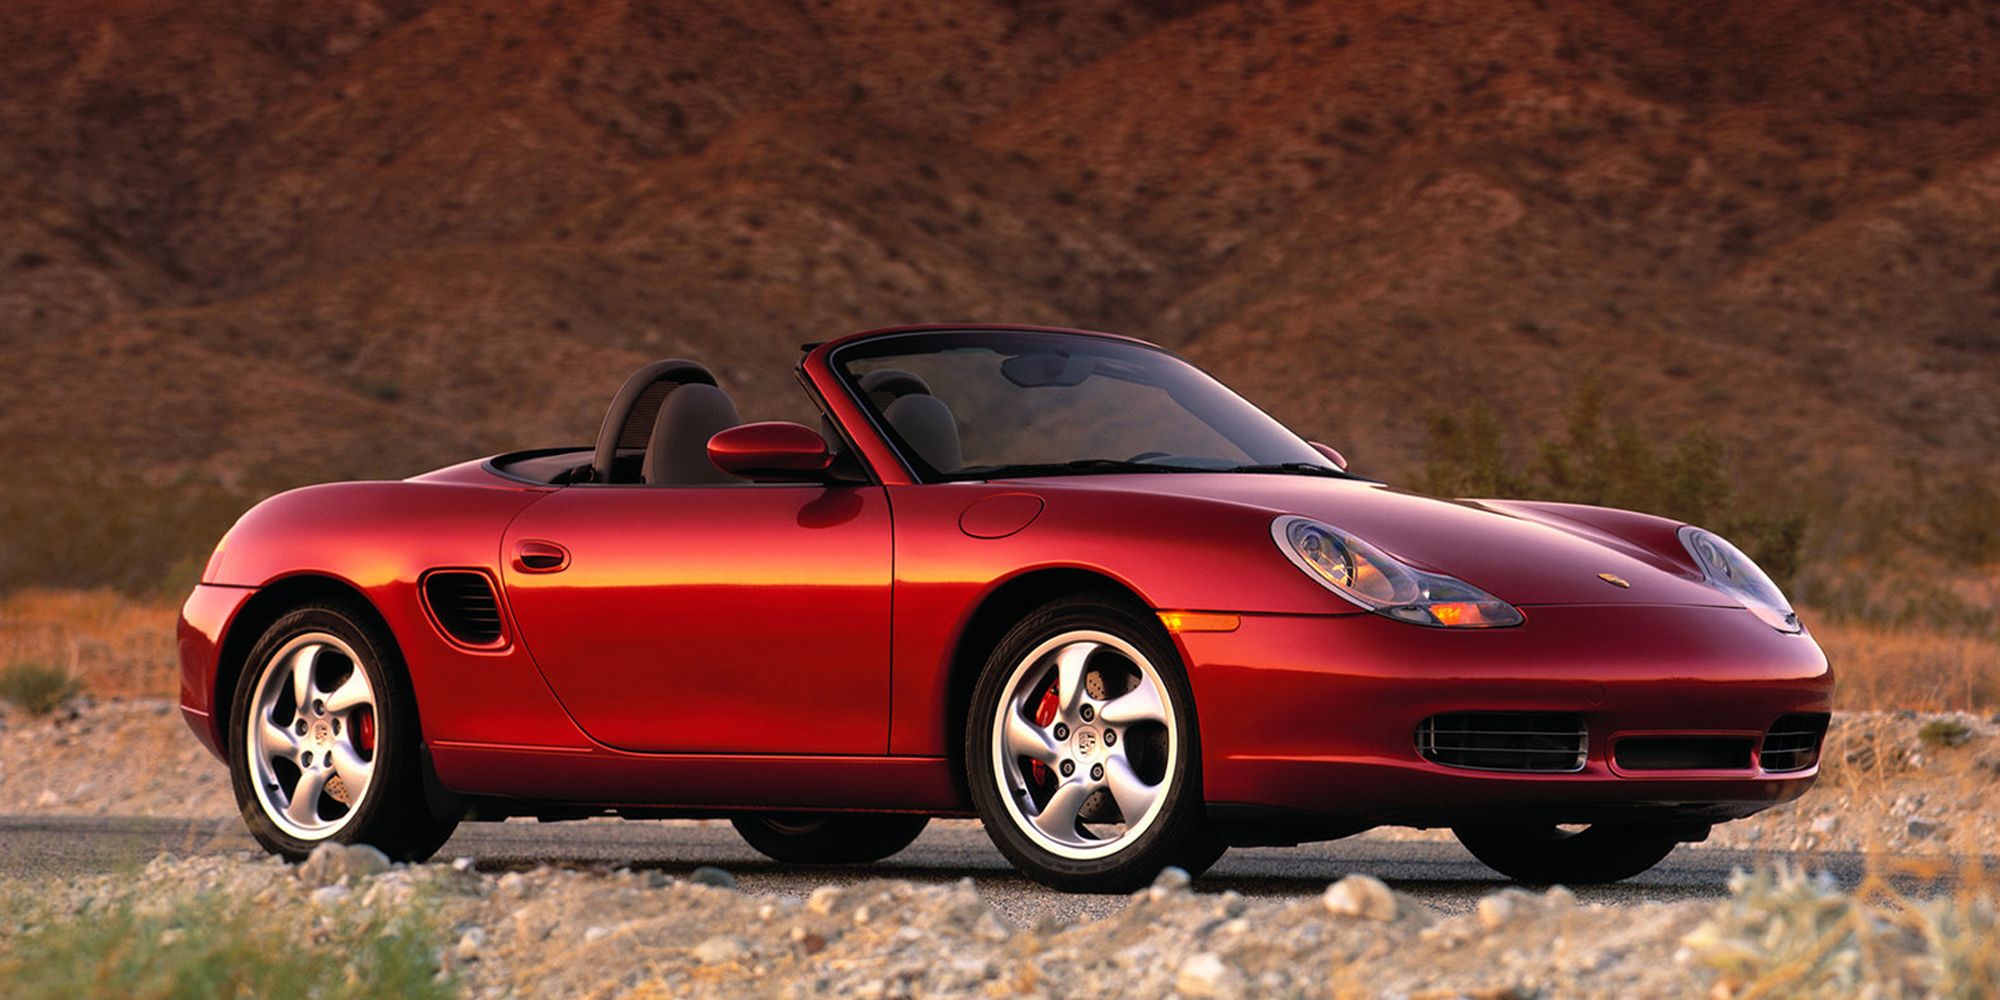 Front 3/4 view of a red Boxster S